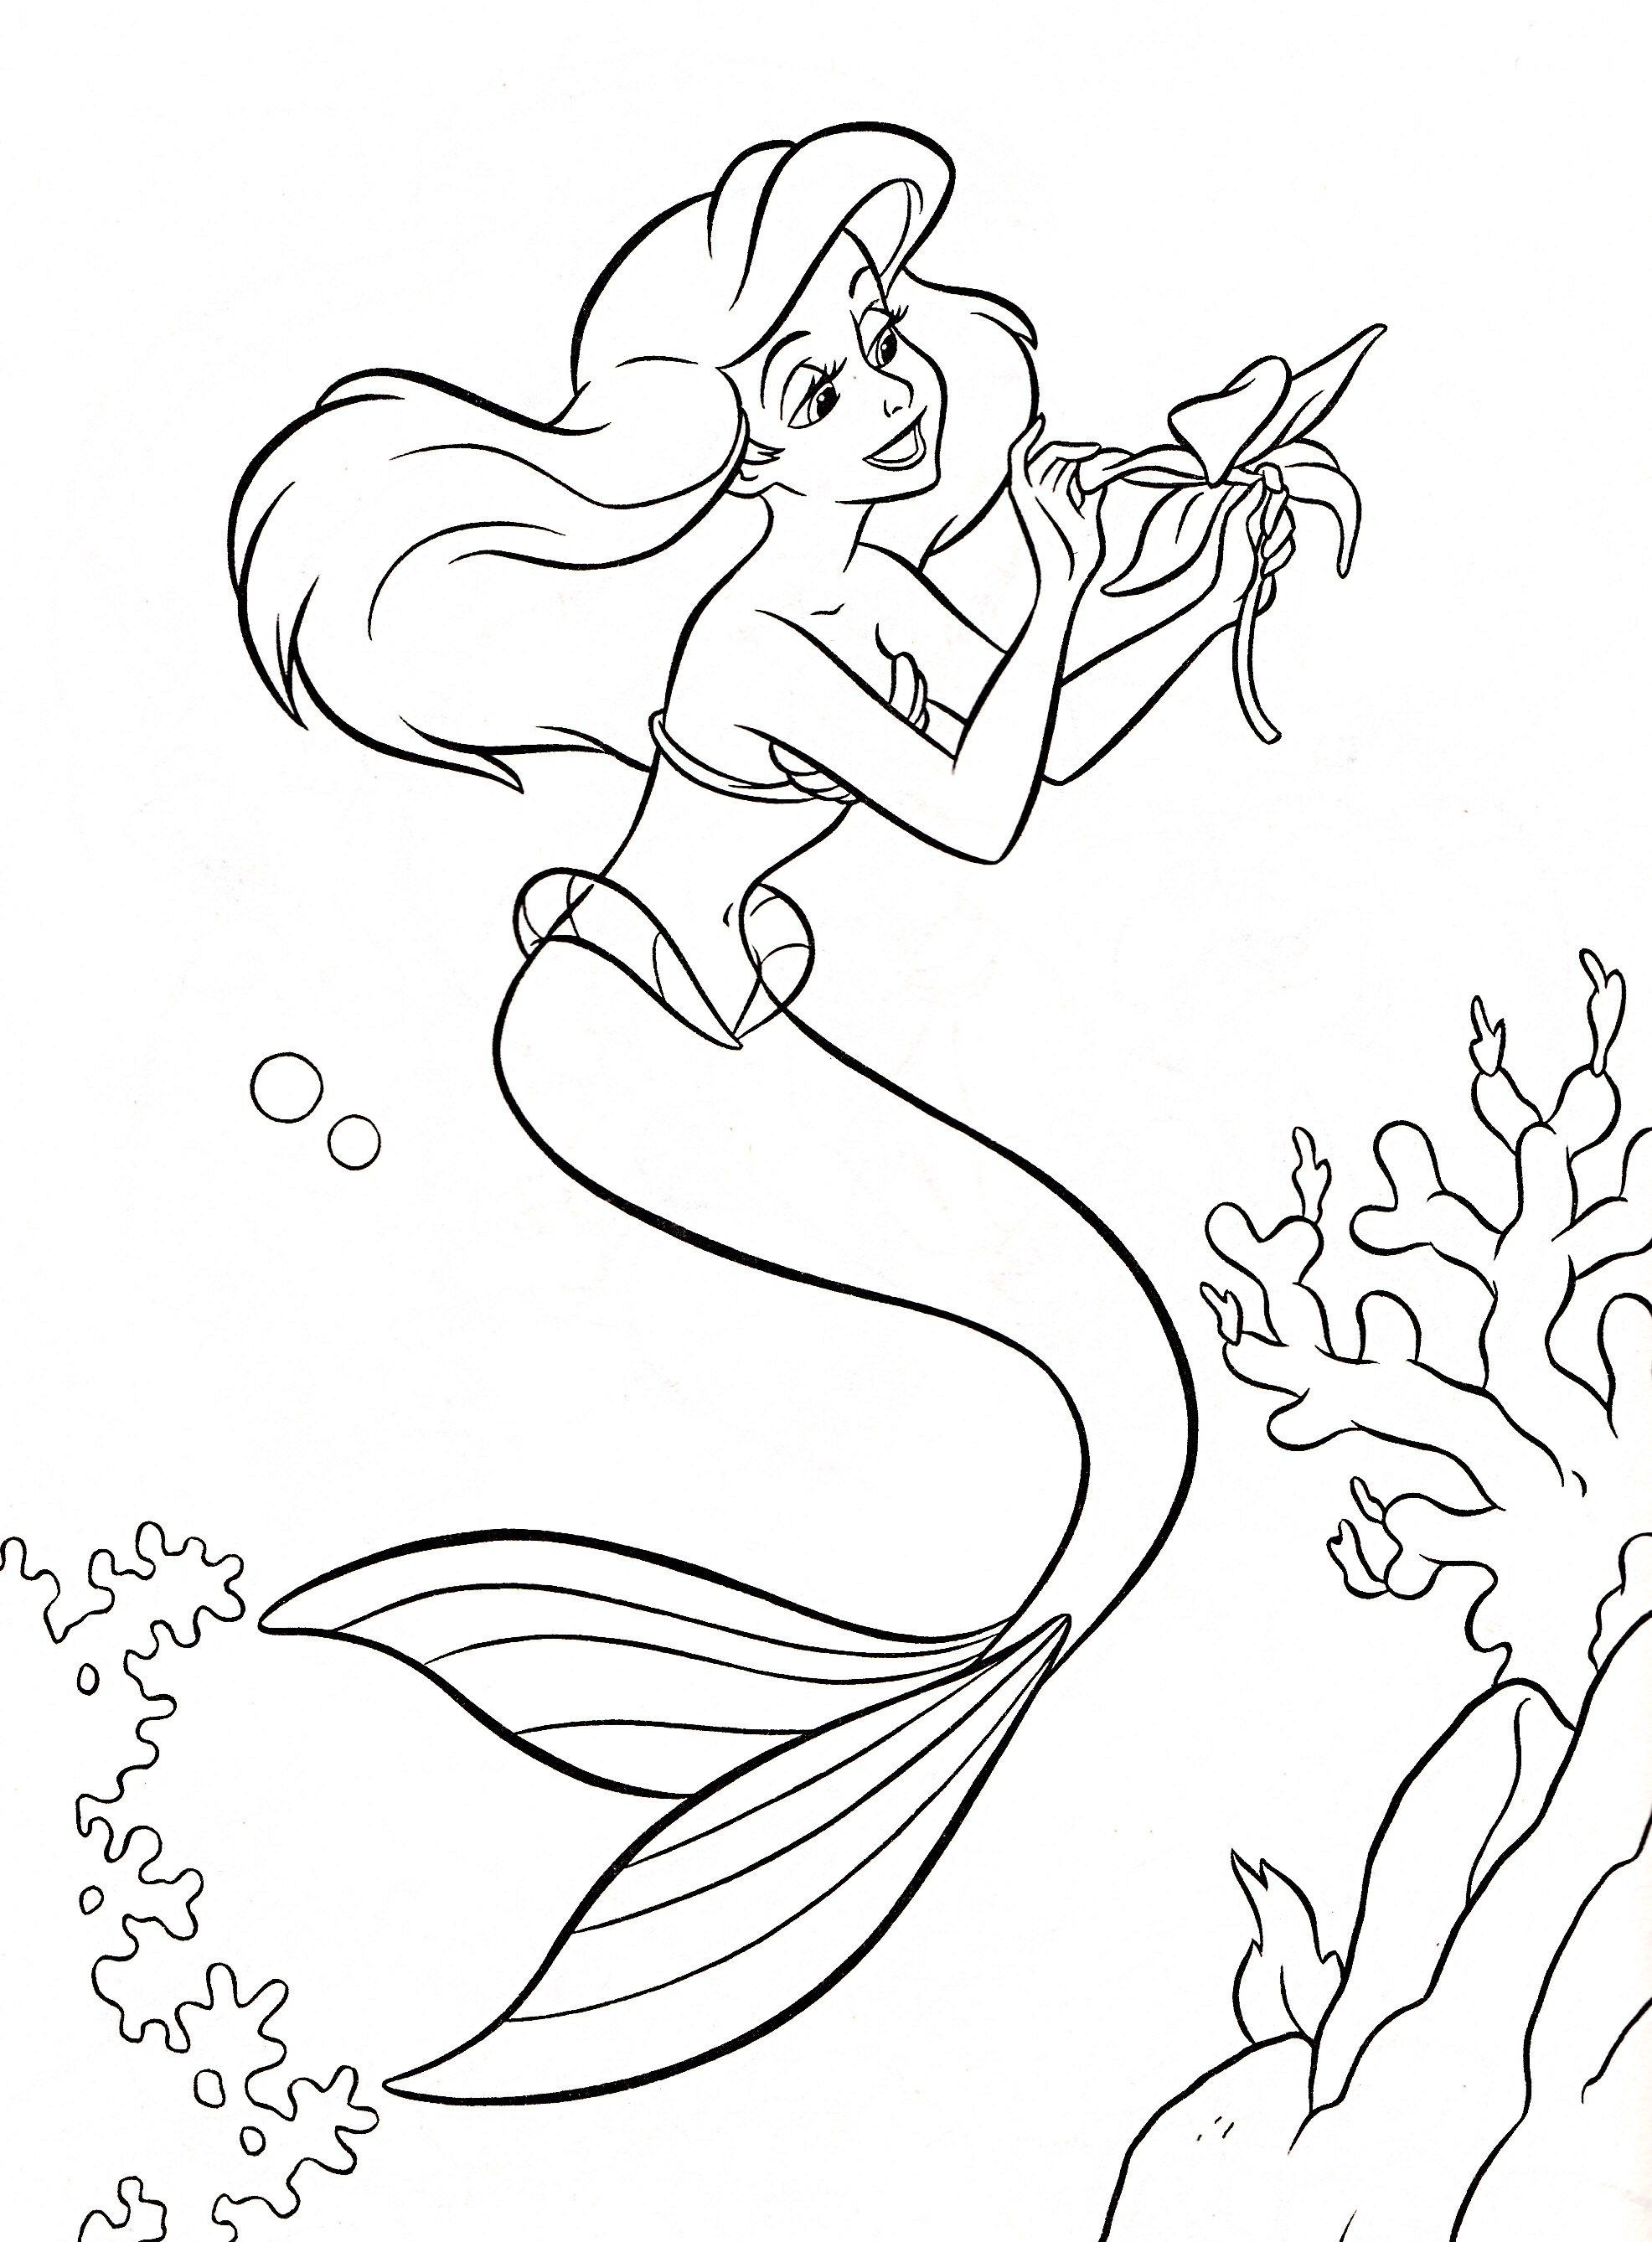 Prince And Princess Coloring Pages at GetDrawings | Free download